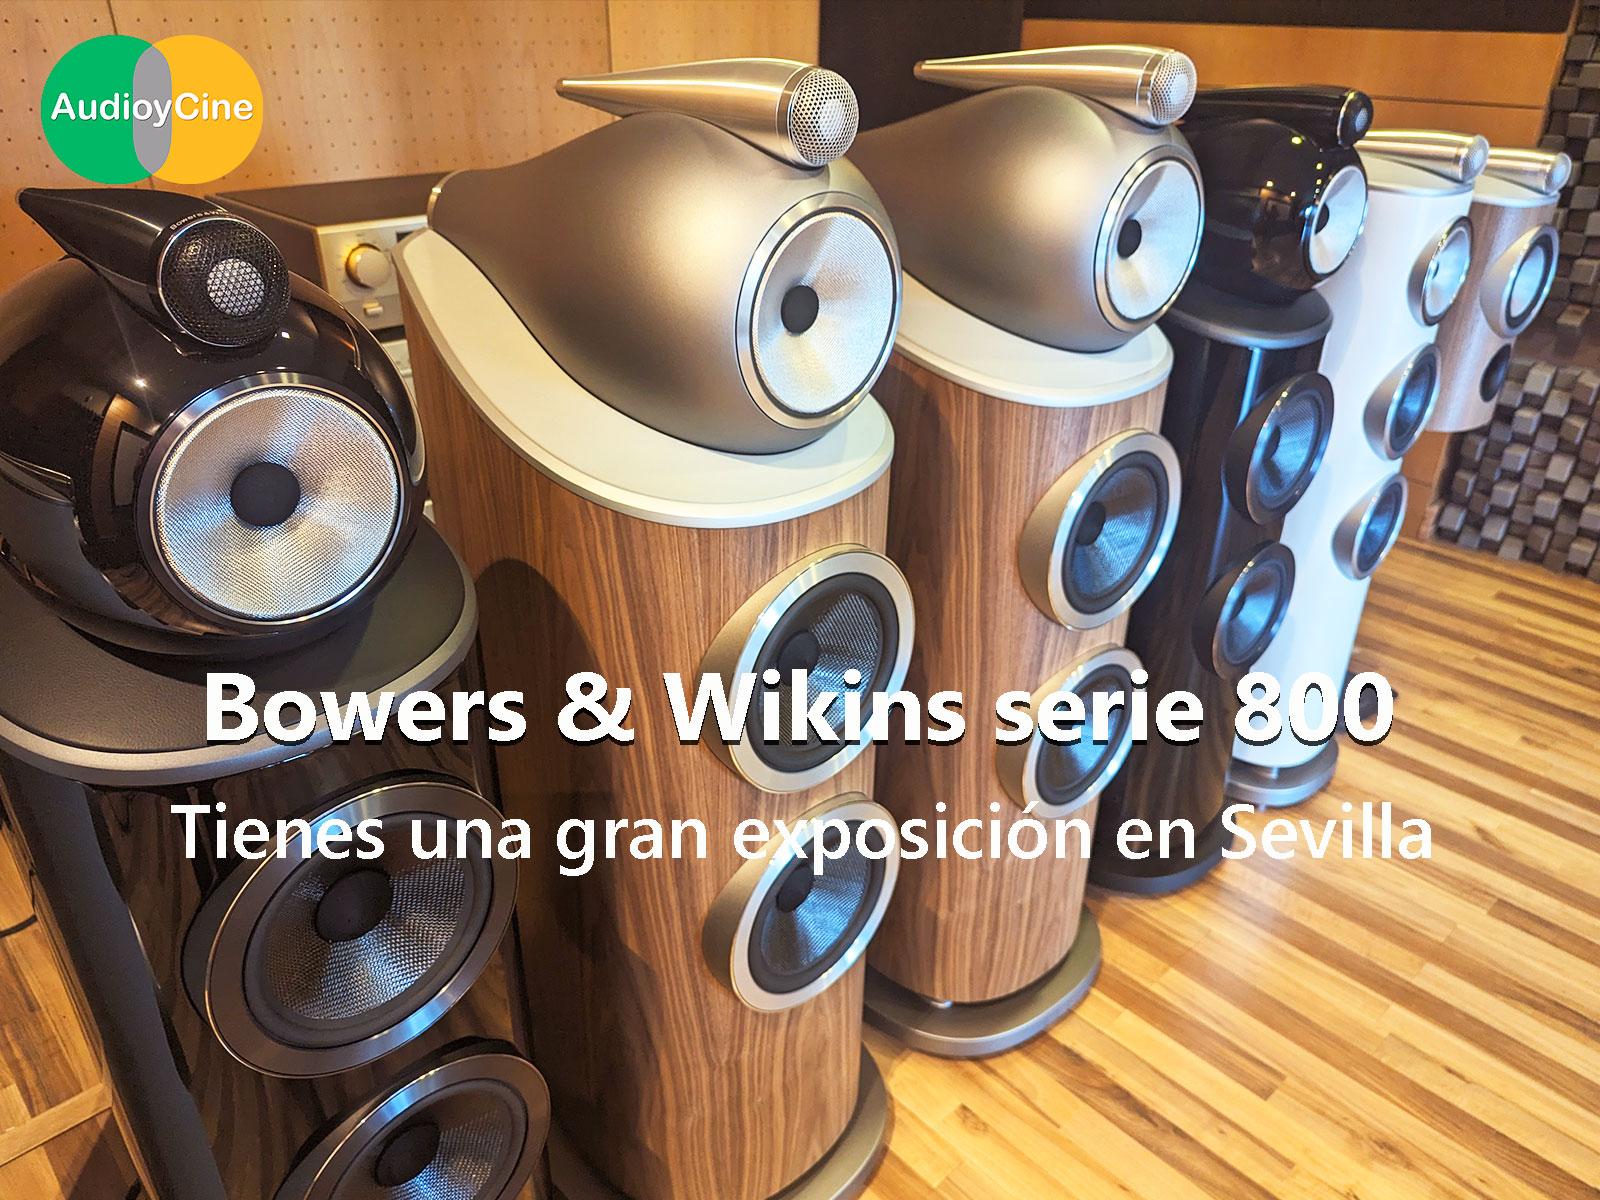 altavoces-Bowers-Wilkins-serie-800-1600x1200-mov